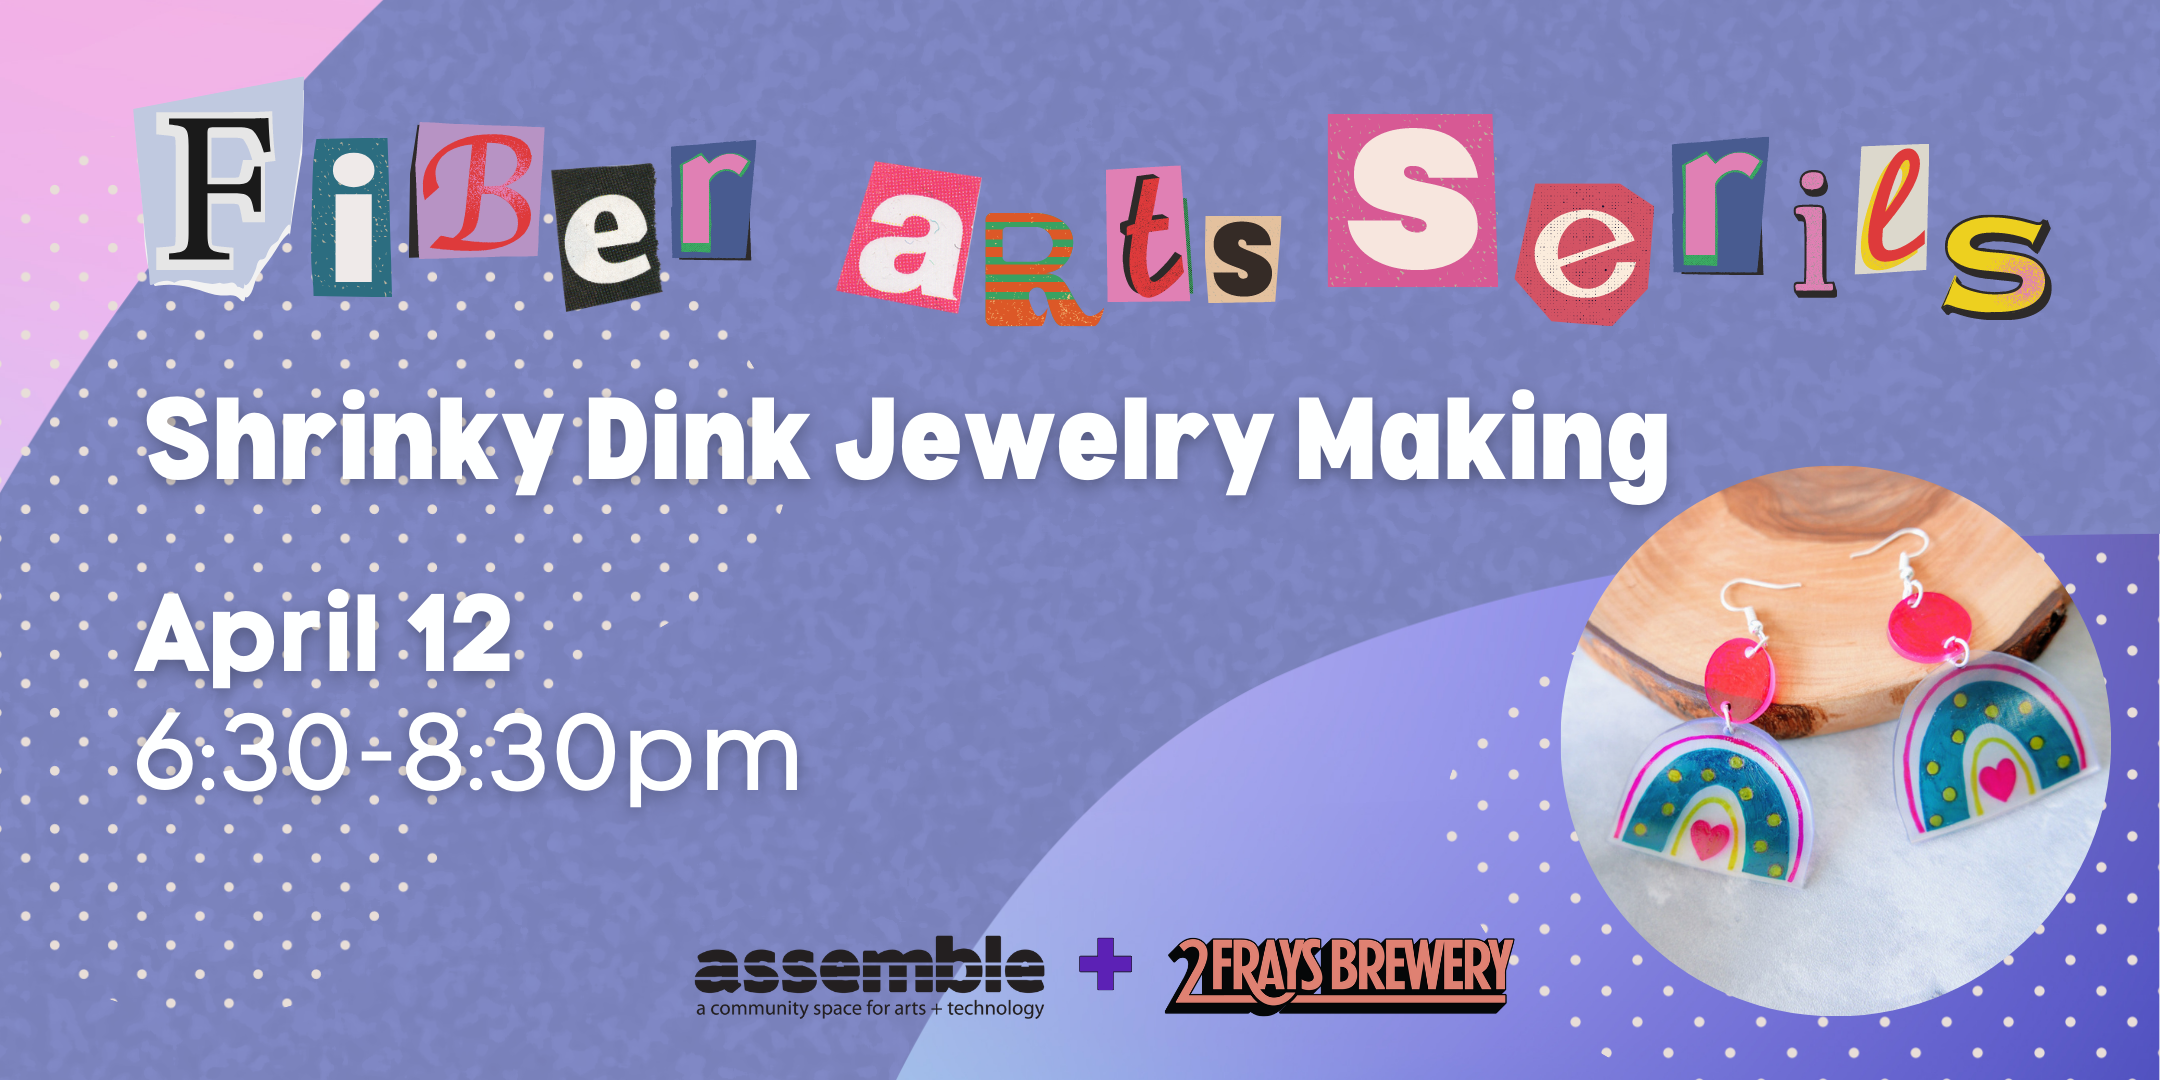 Fiber Arts series shrinky dink jewelry at Two Frays Brewery April 12 6:30-8:30pm